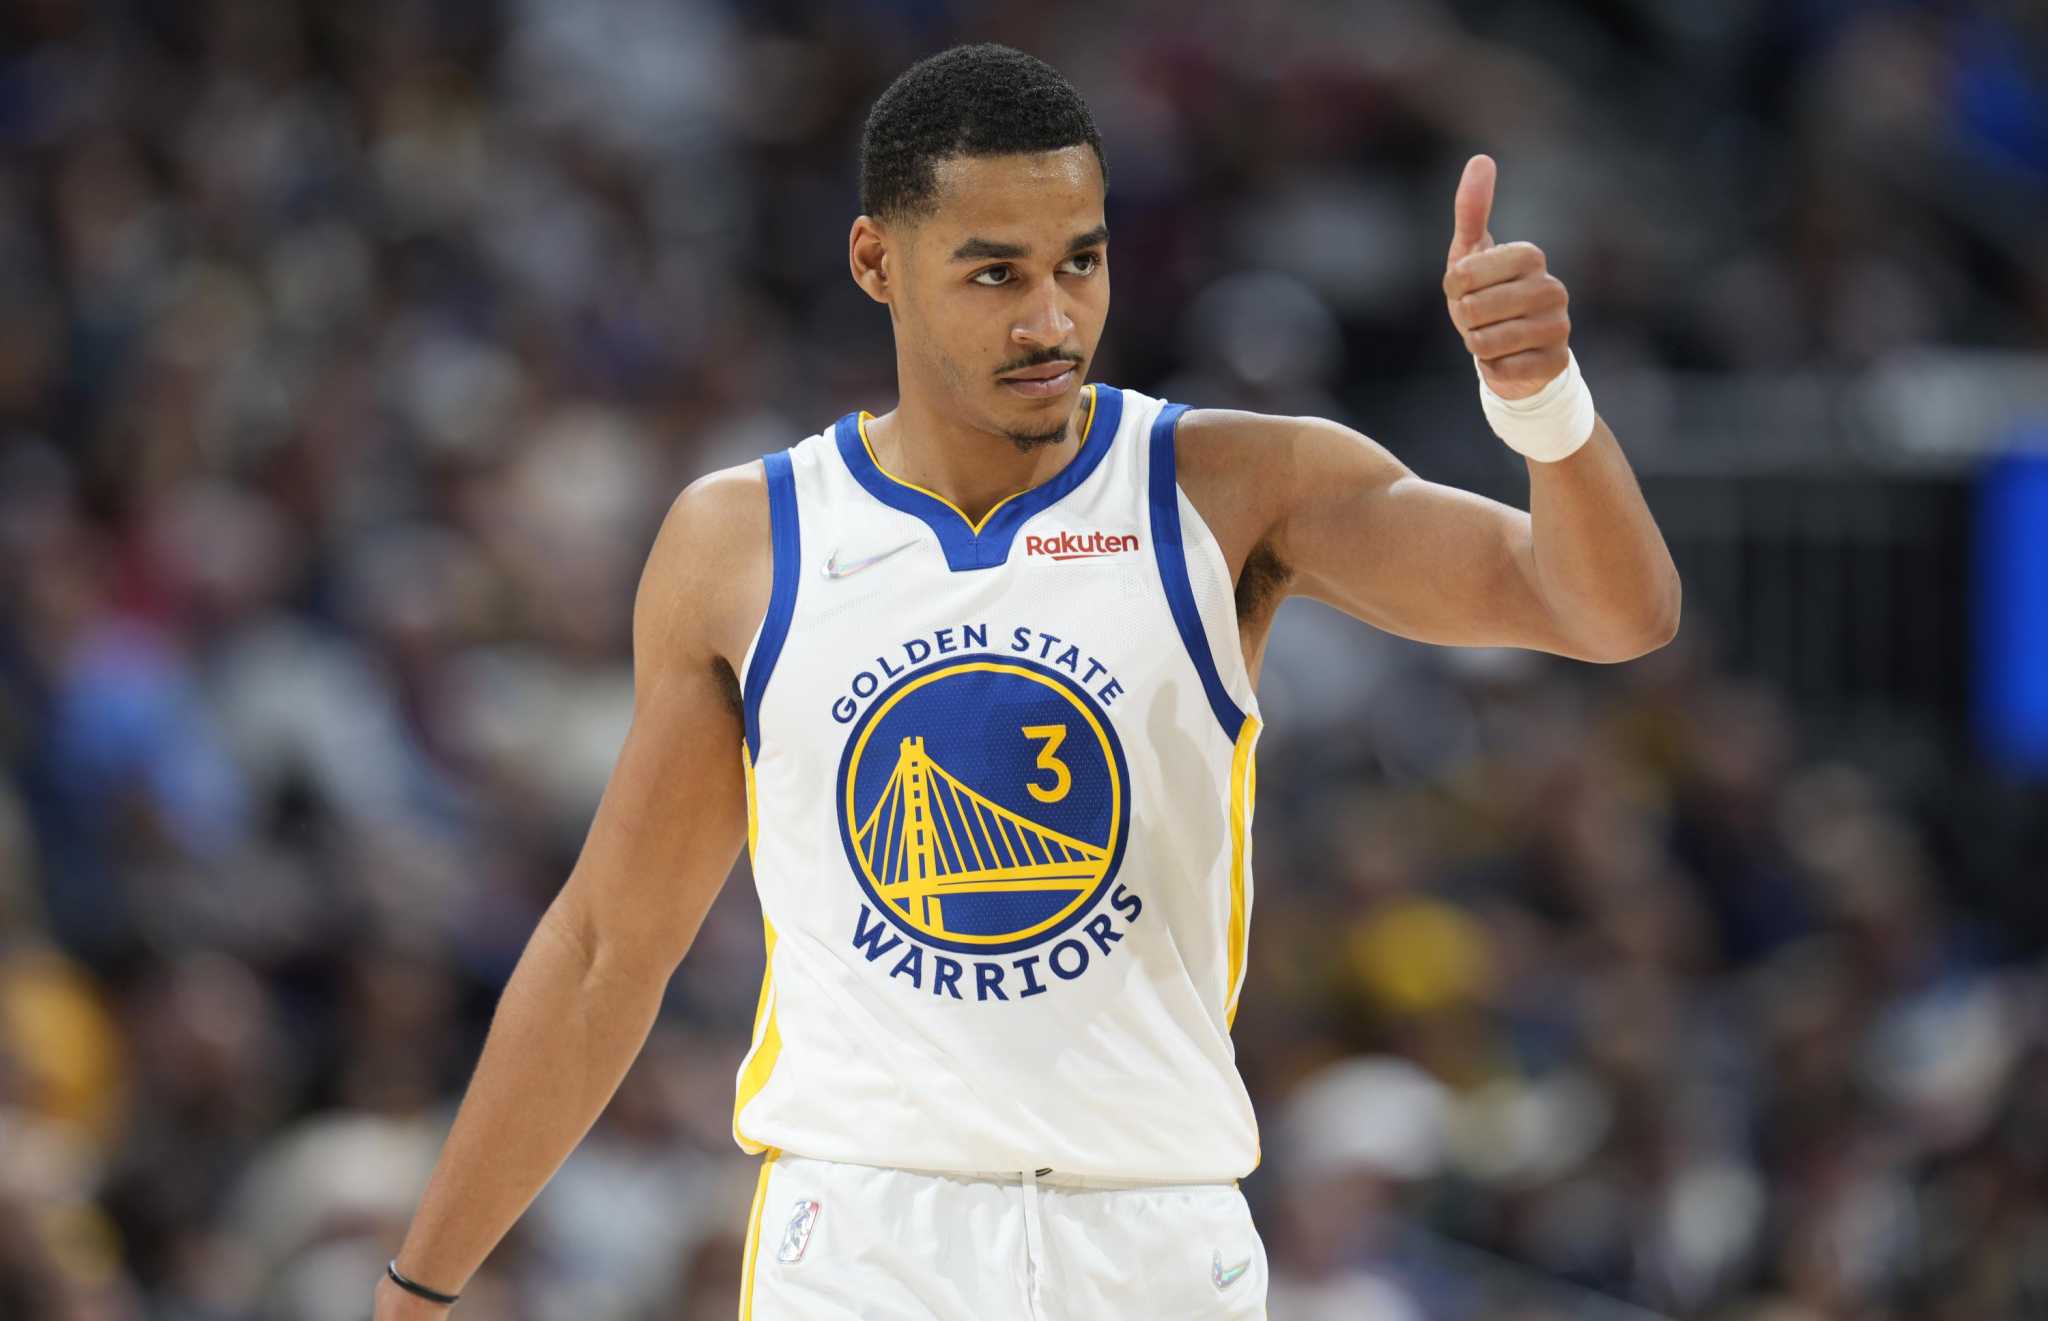 Sterph Curry, Jordan Poole lead Warriors to 127-118 win against